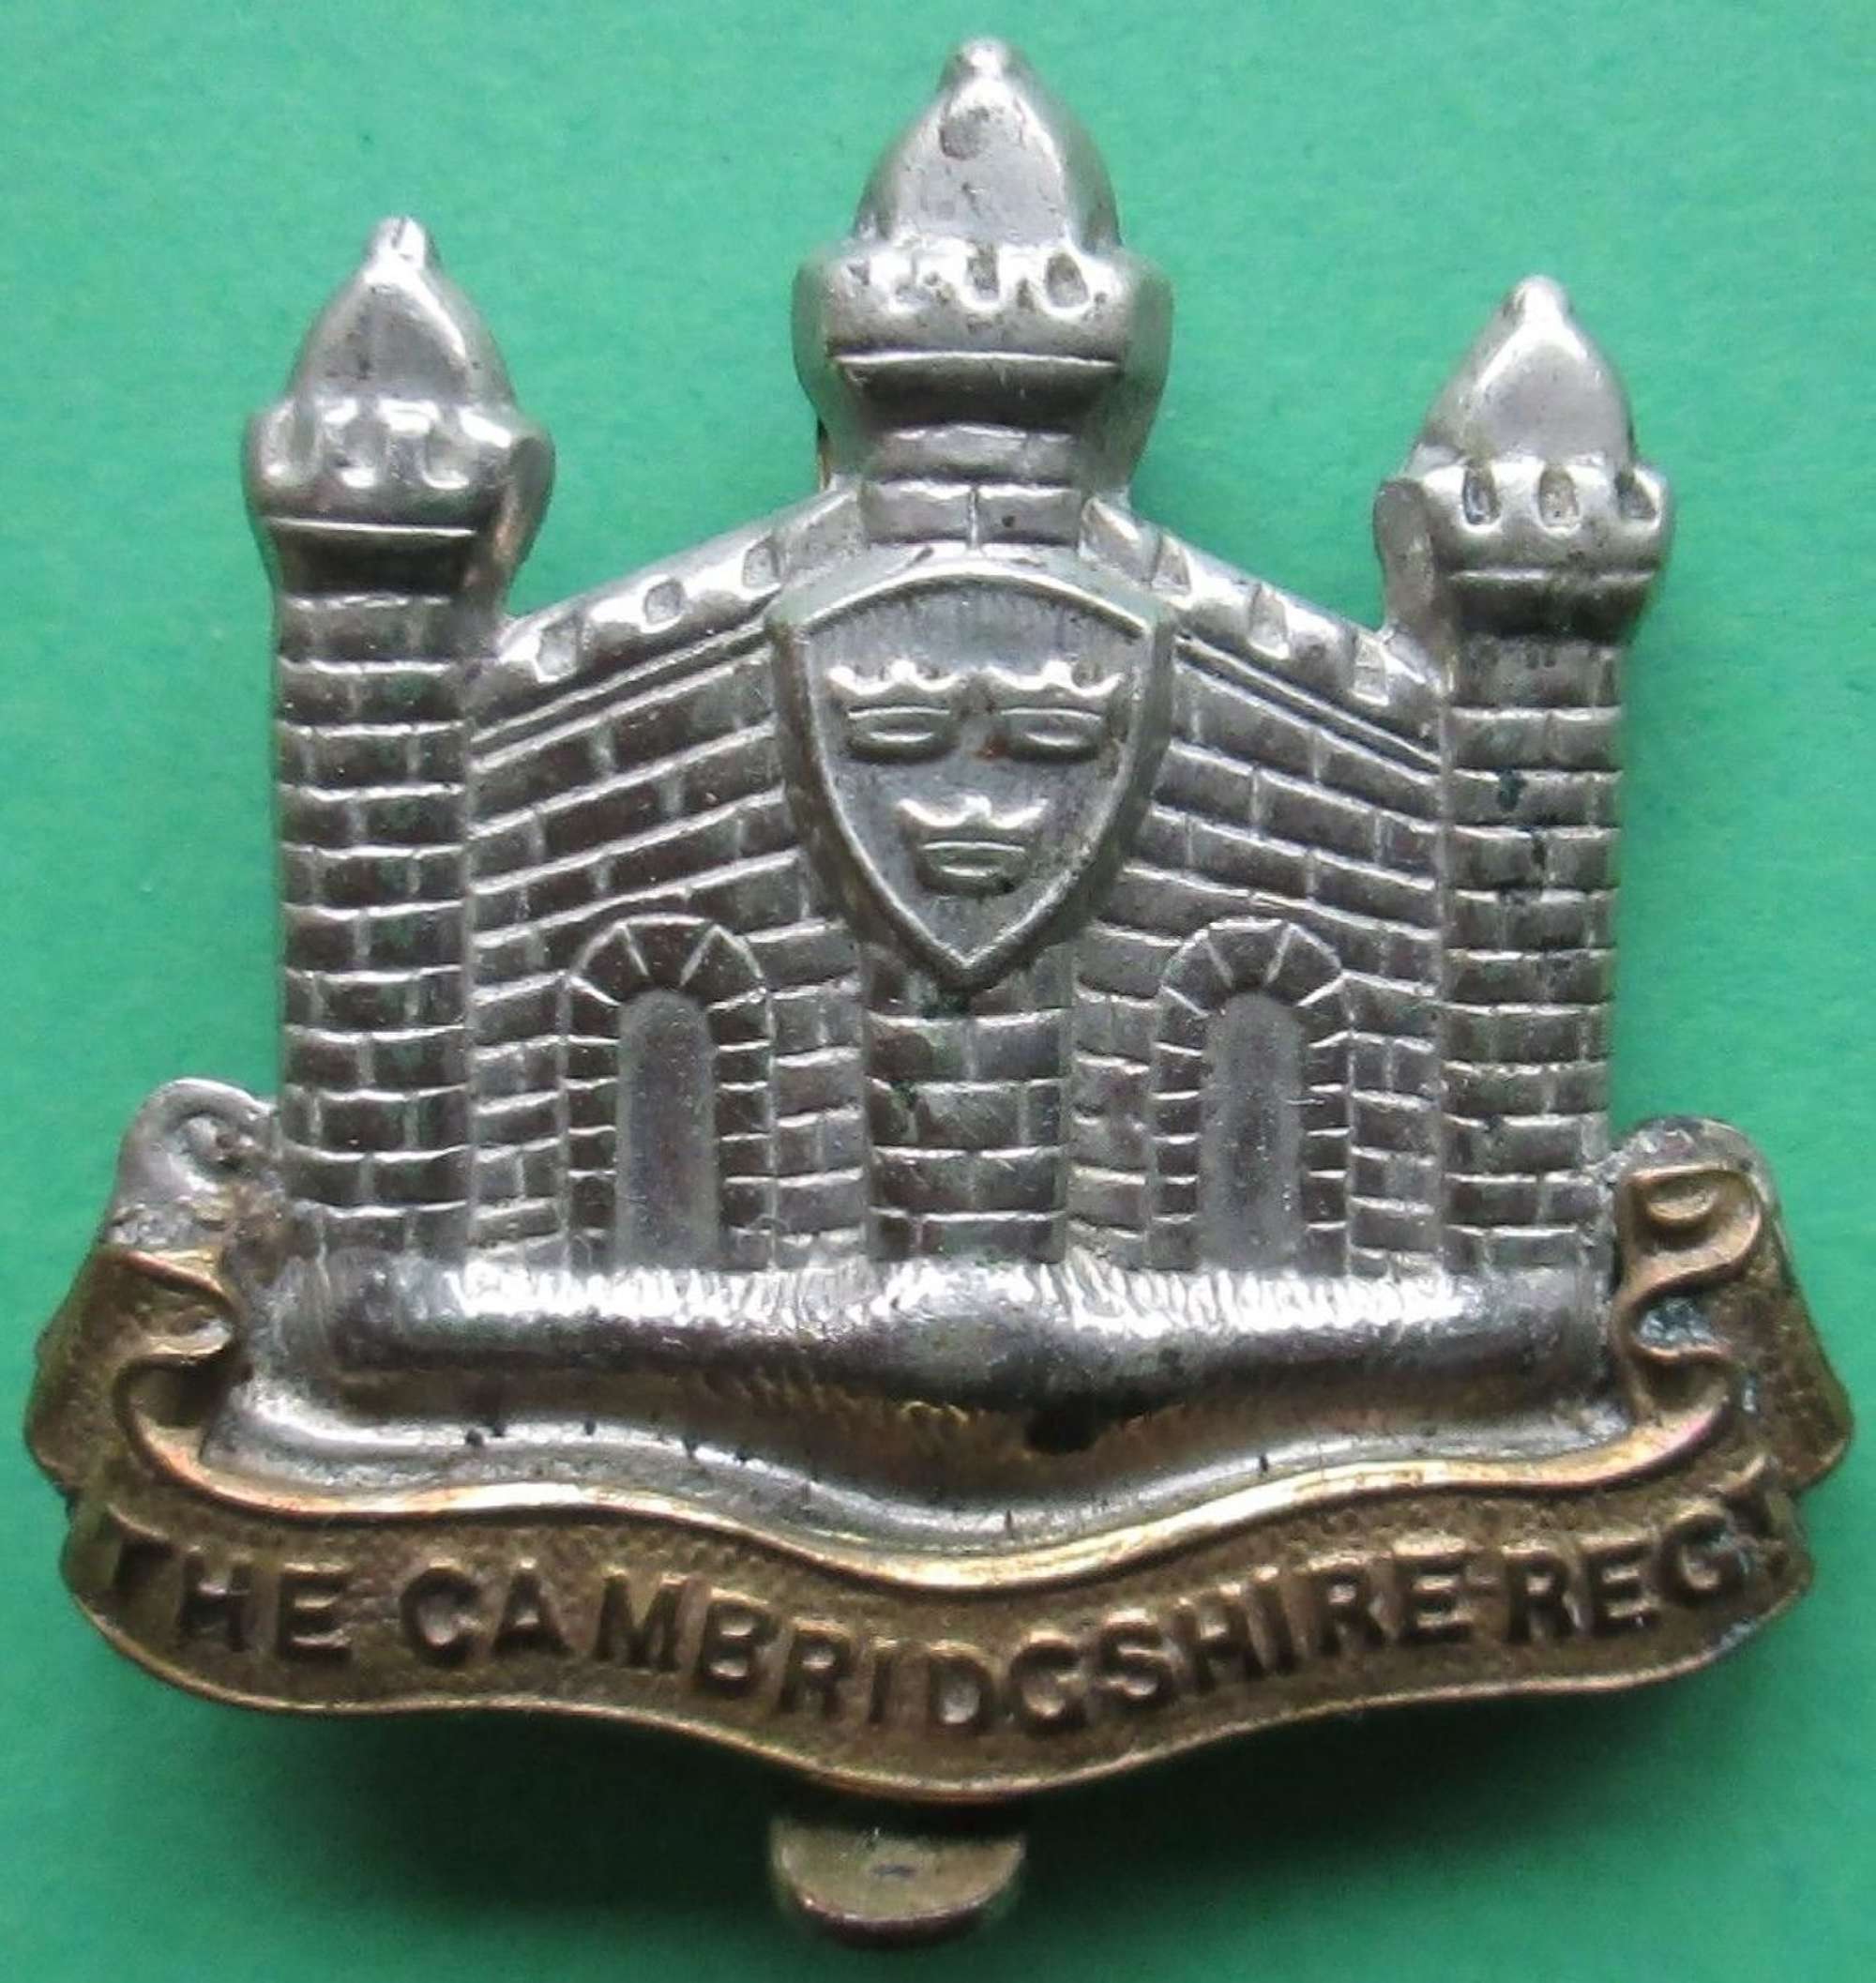 A CAMBRIDGESHIRE REGT CAP BADGE WITH THE 1ST E MISSING